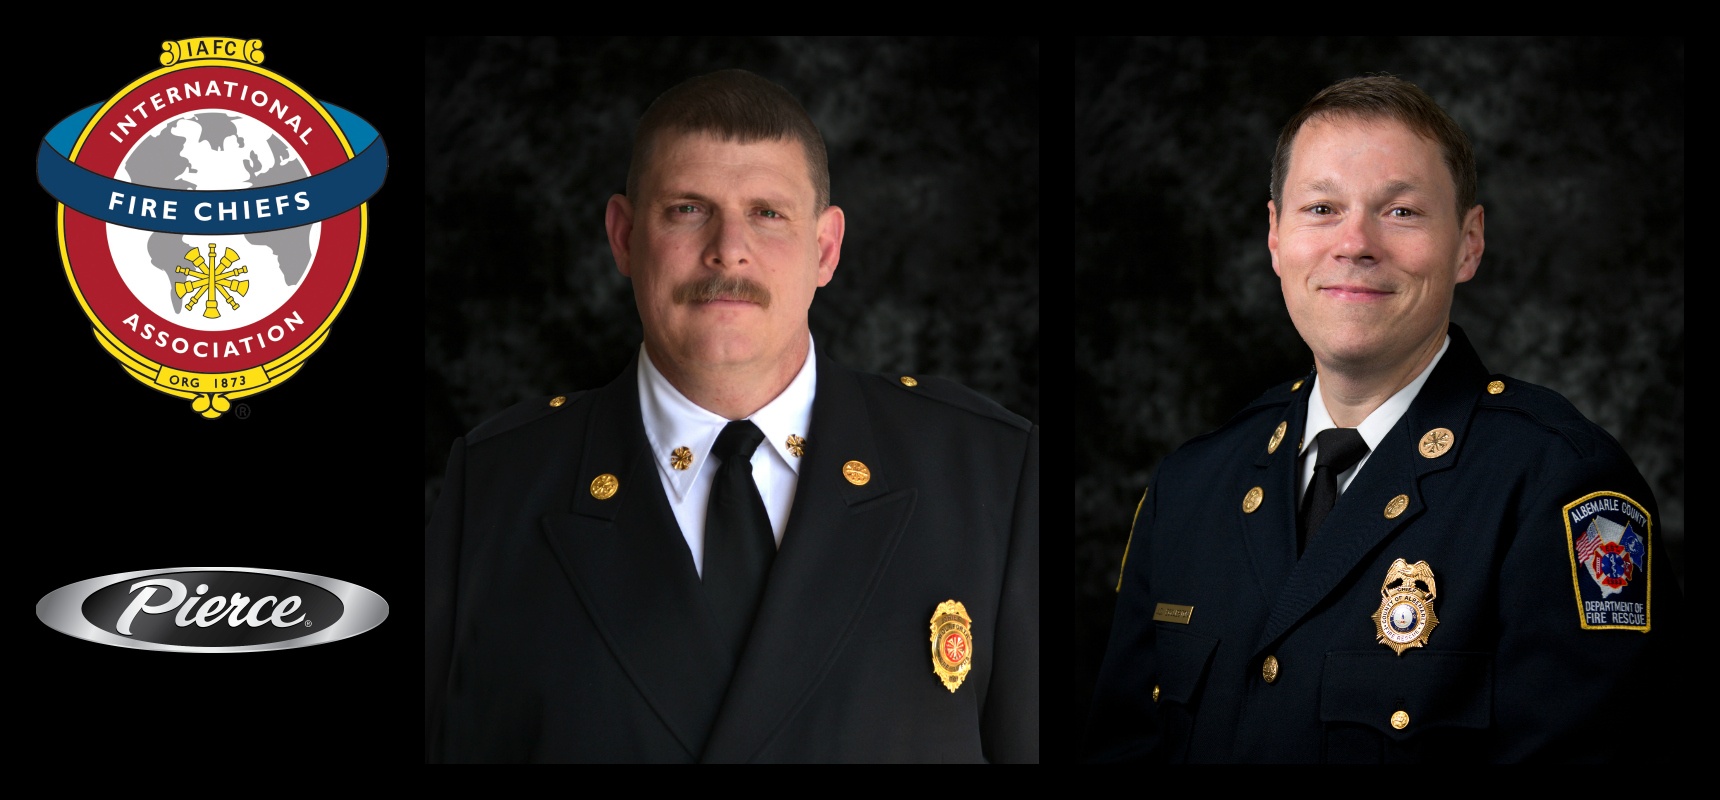 Pierce Manufacturing and the IAFC Honor 2015 Volunteer and Career Fire Chiefs of the Year_Header.jpg